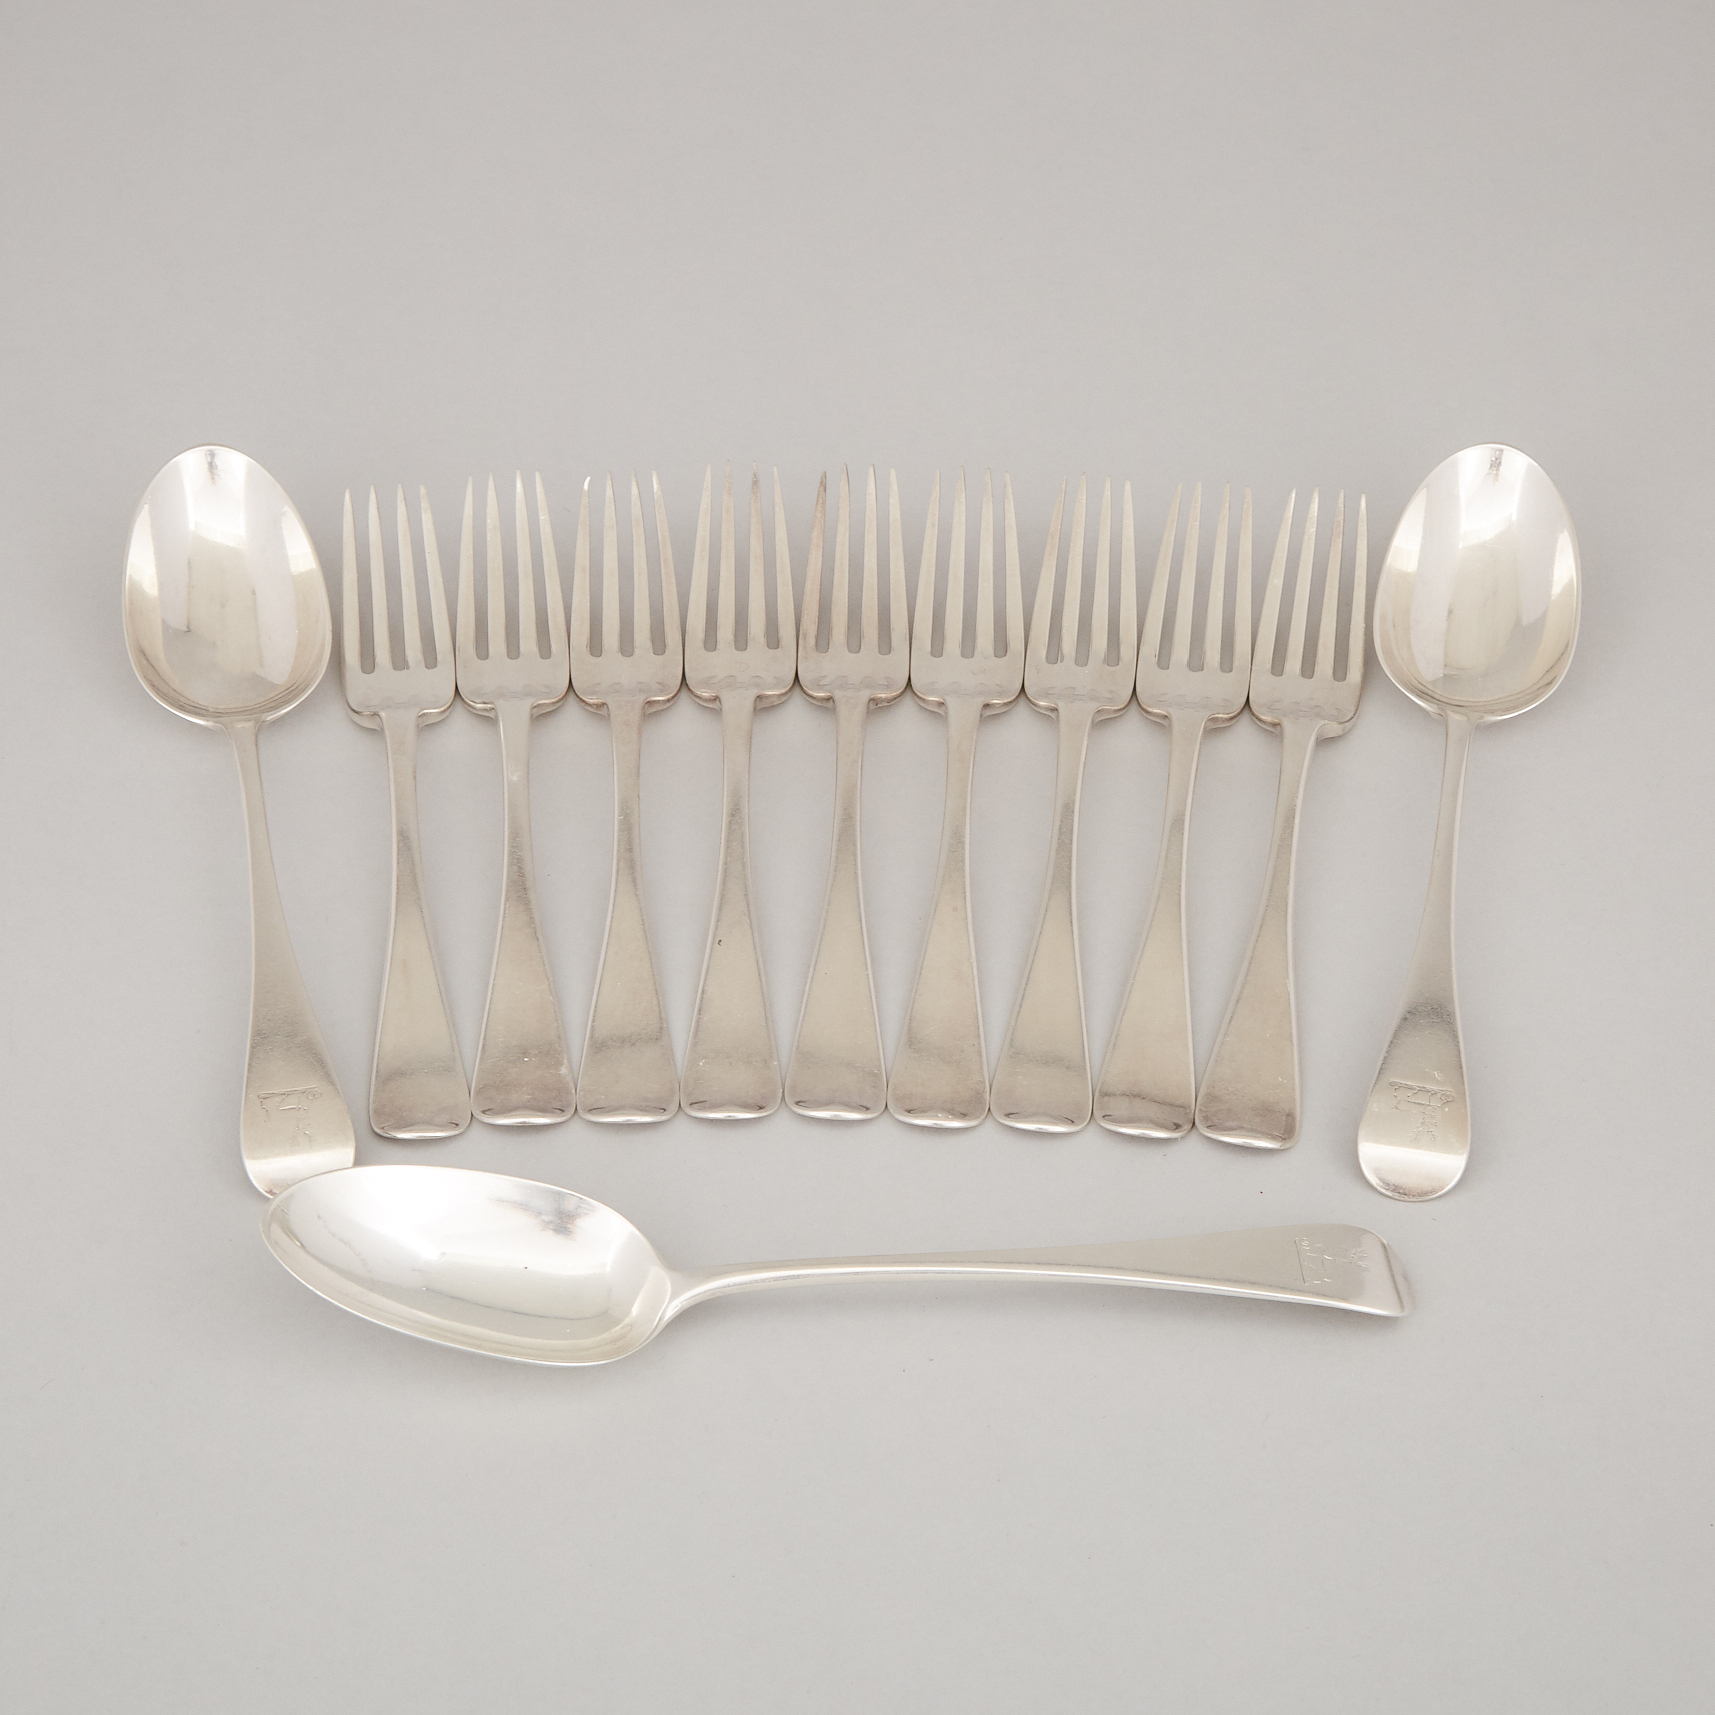 Nine George IV Silver Old English Pattern Table Forks, Richard Poulden, London, 1824 and Three Victorian Table Spoons, George Adams, 1877